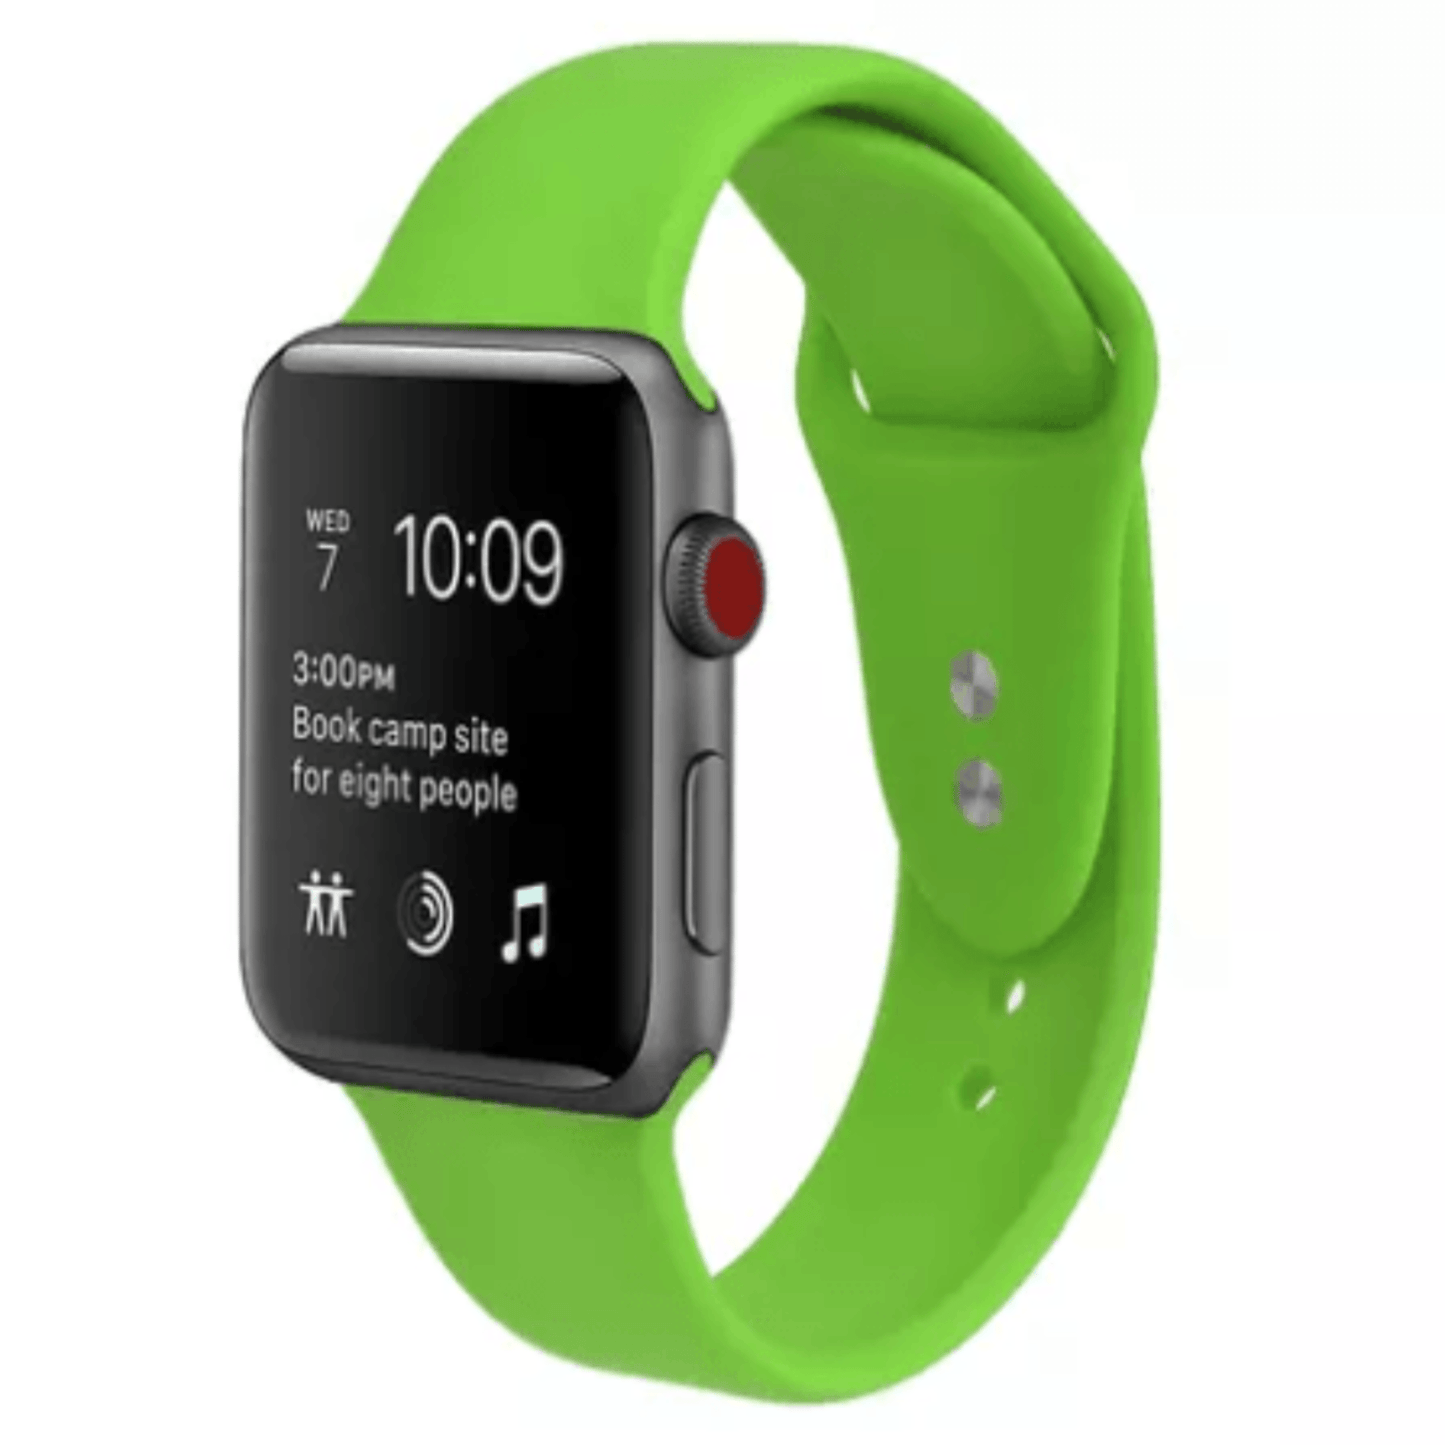 Silicone Sport Replacement Band for Apple Watch Green Apple Watch Band Elements Watches